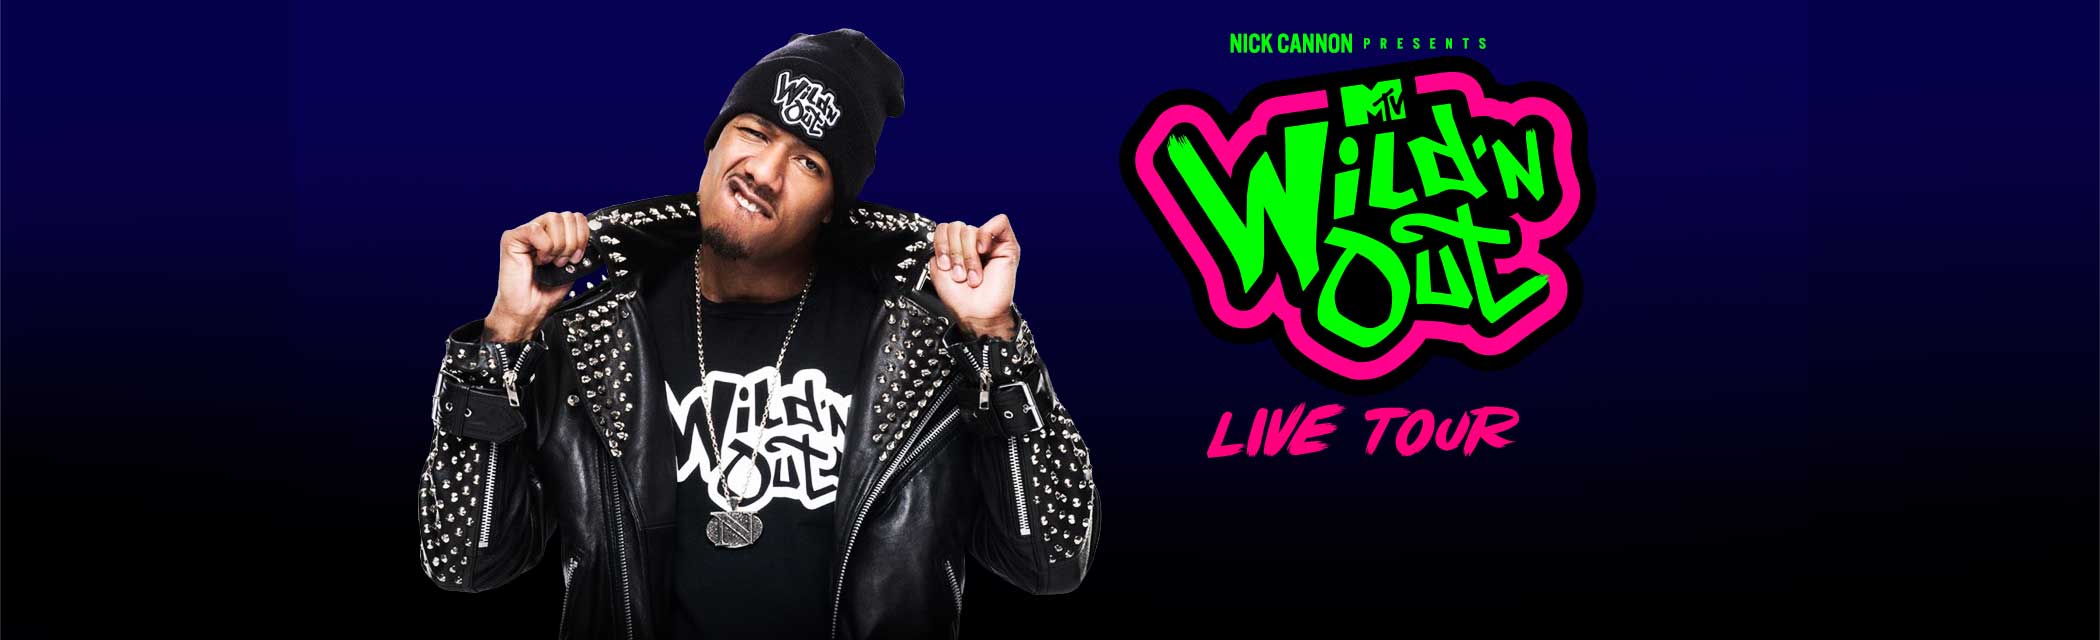 Nick Cannon Presents: MTV Wild ‘N Out Live 